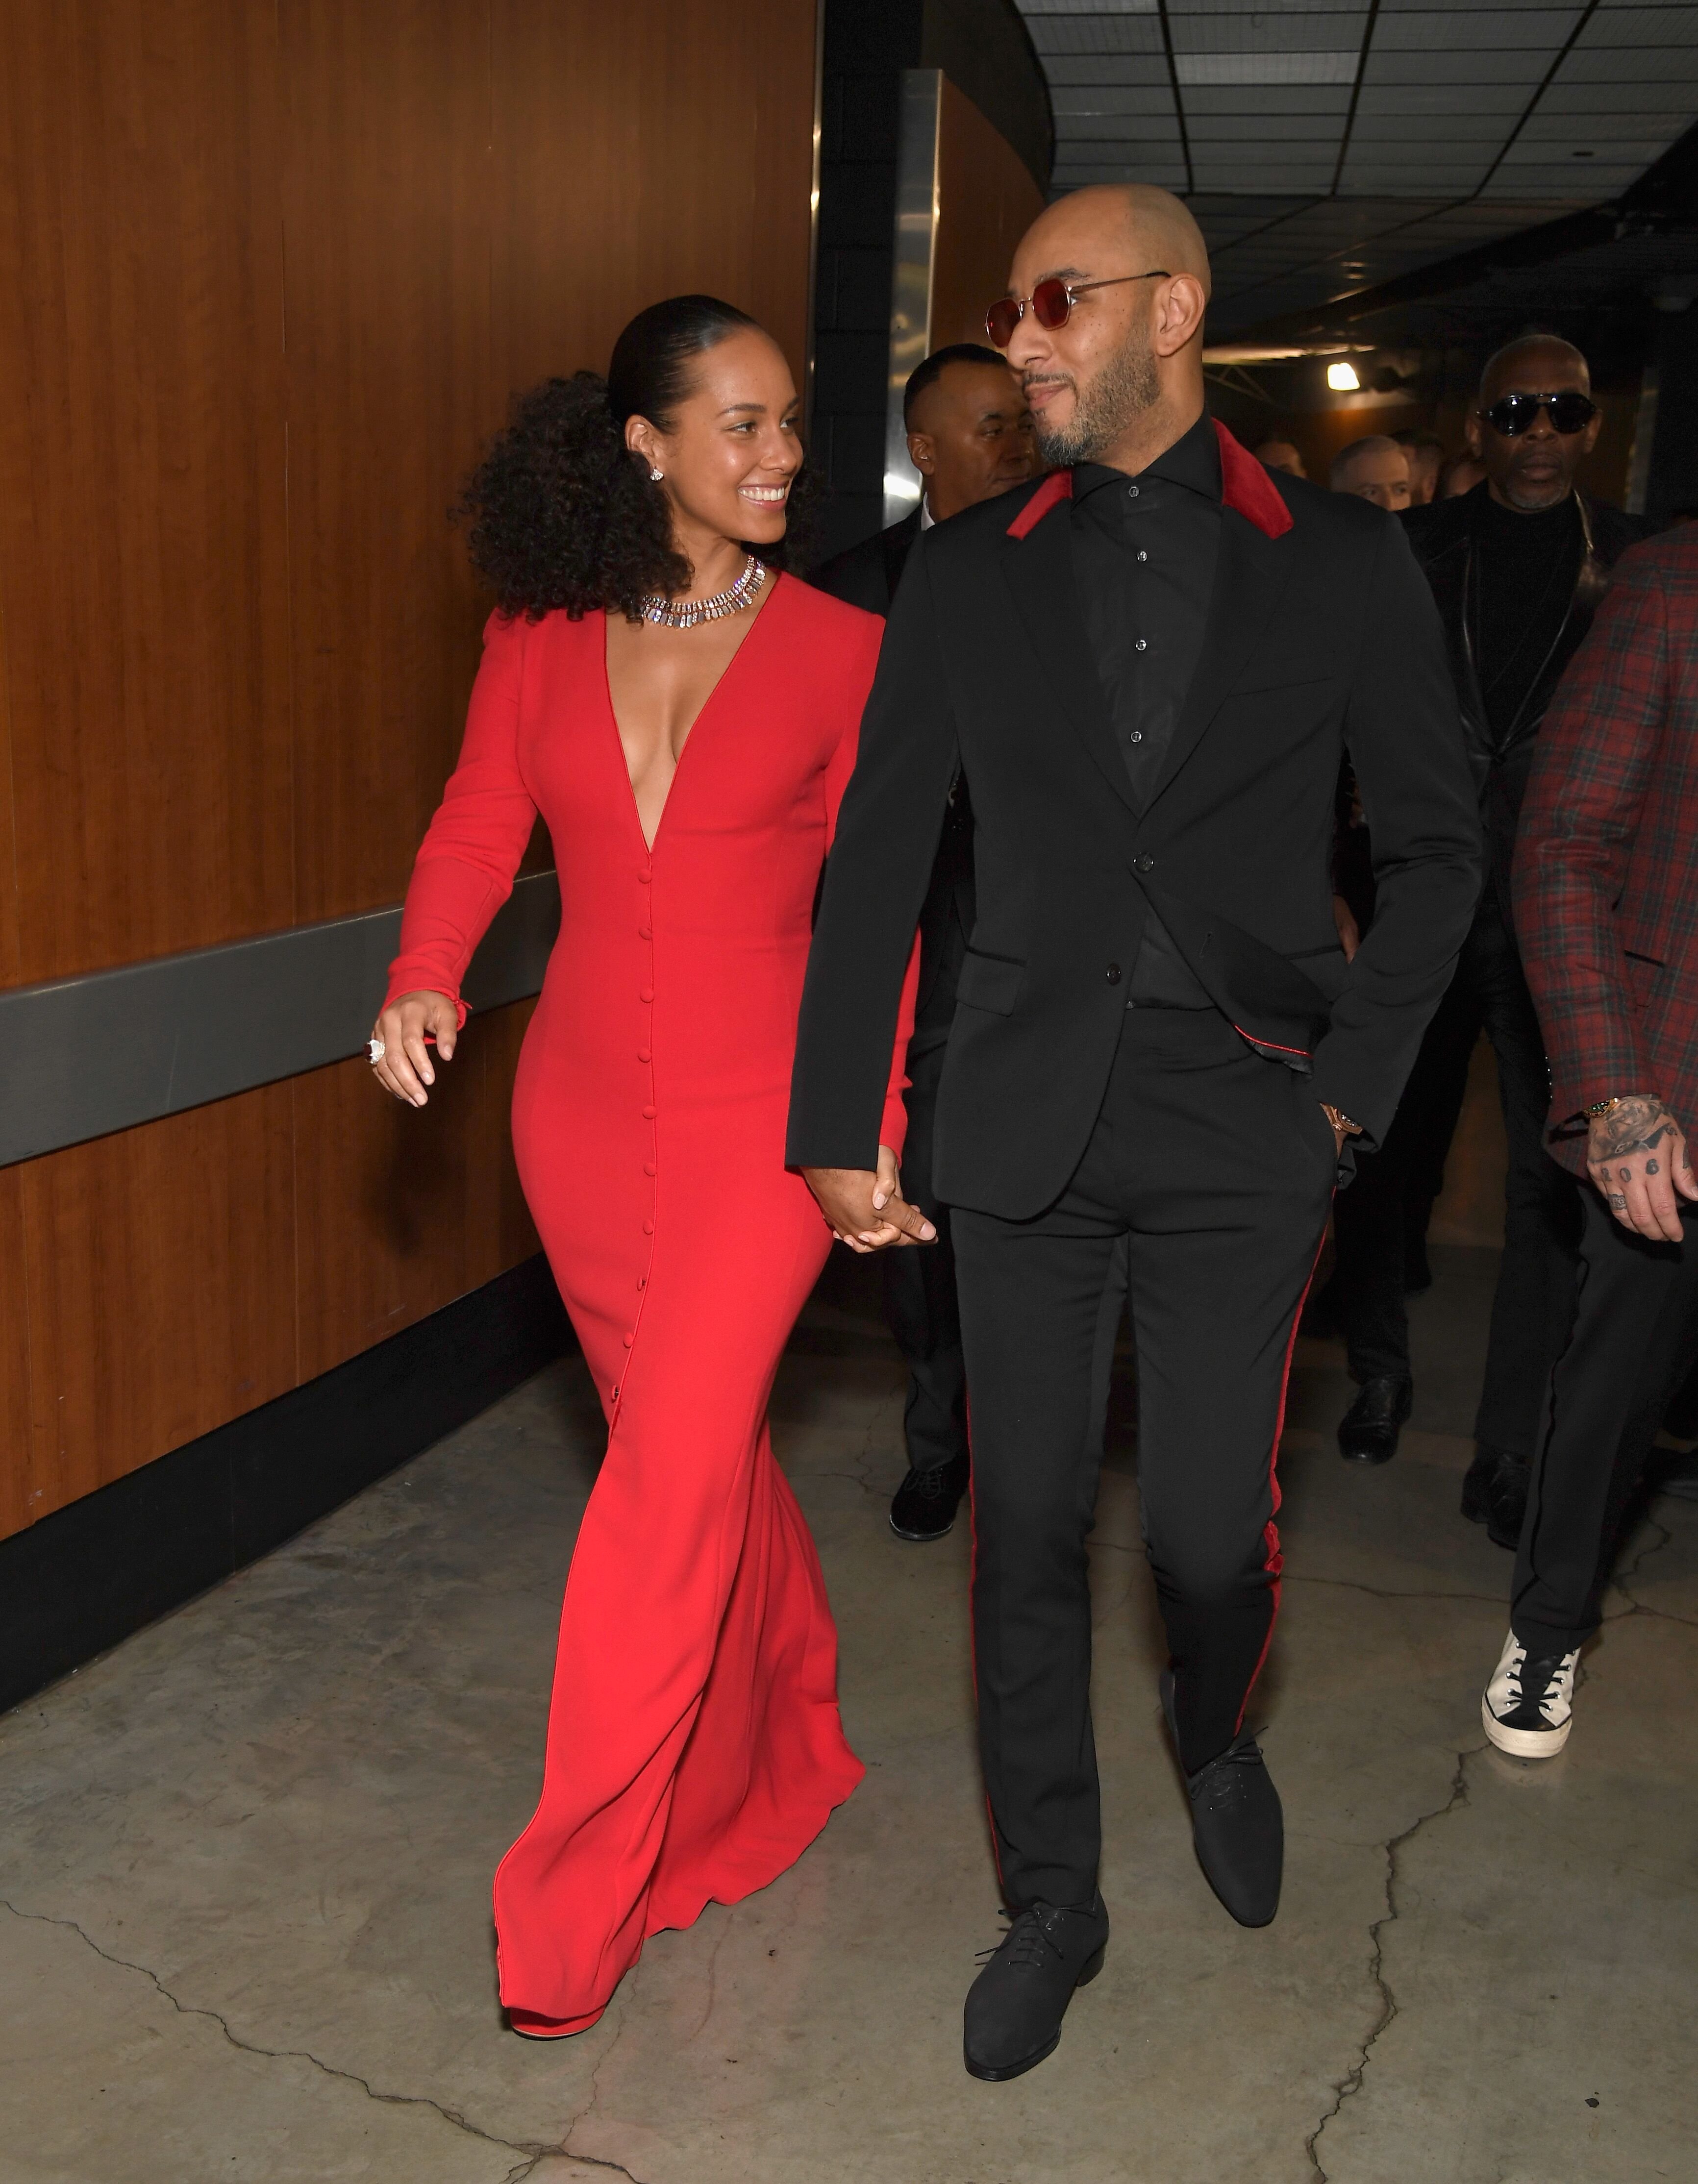 Alicia Keys and husband rapper Swizz Beatz at the 61st Annual GRAMMY Awards in 2019 | Source: Getty Images